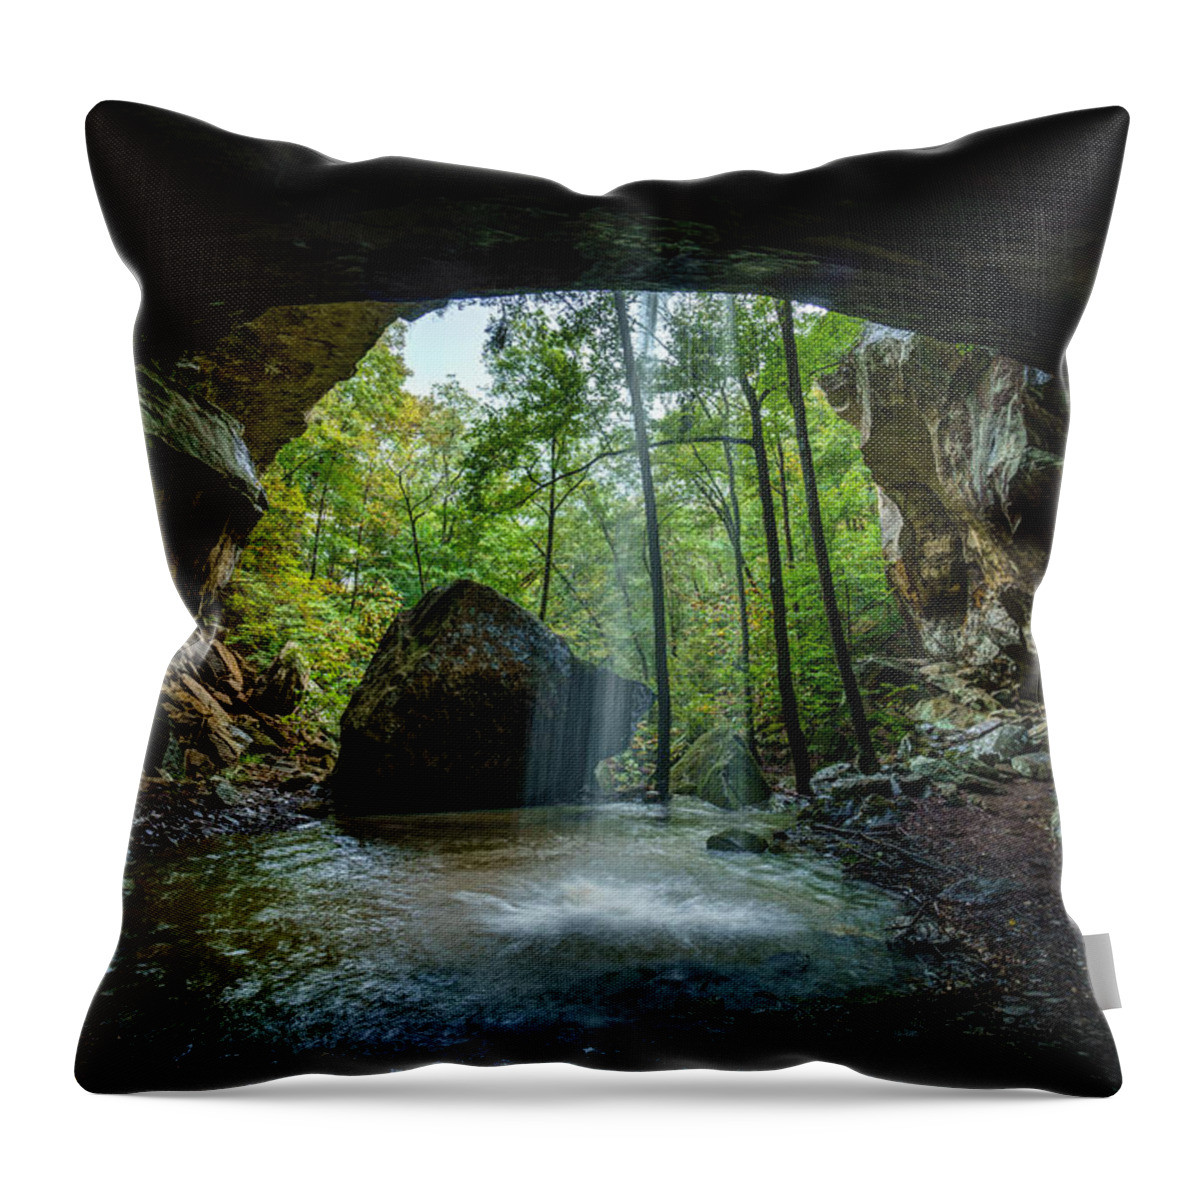 Pam's Grotto Throw Pillow featuring the photograph Pams Grotto by David Dedman